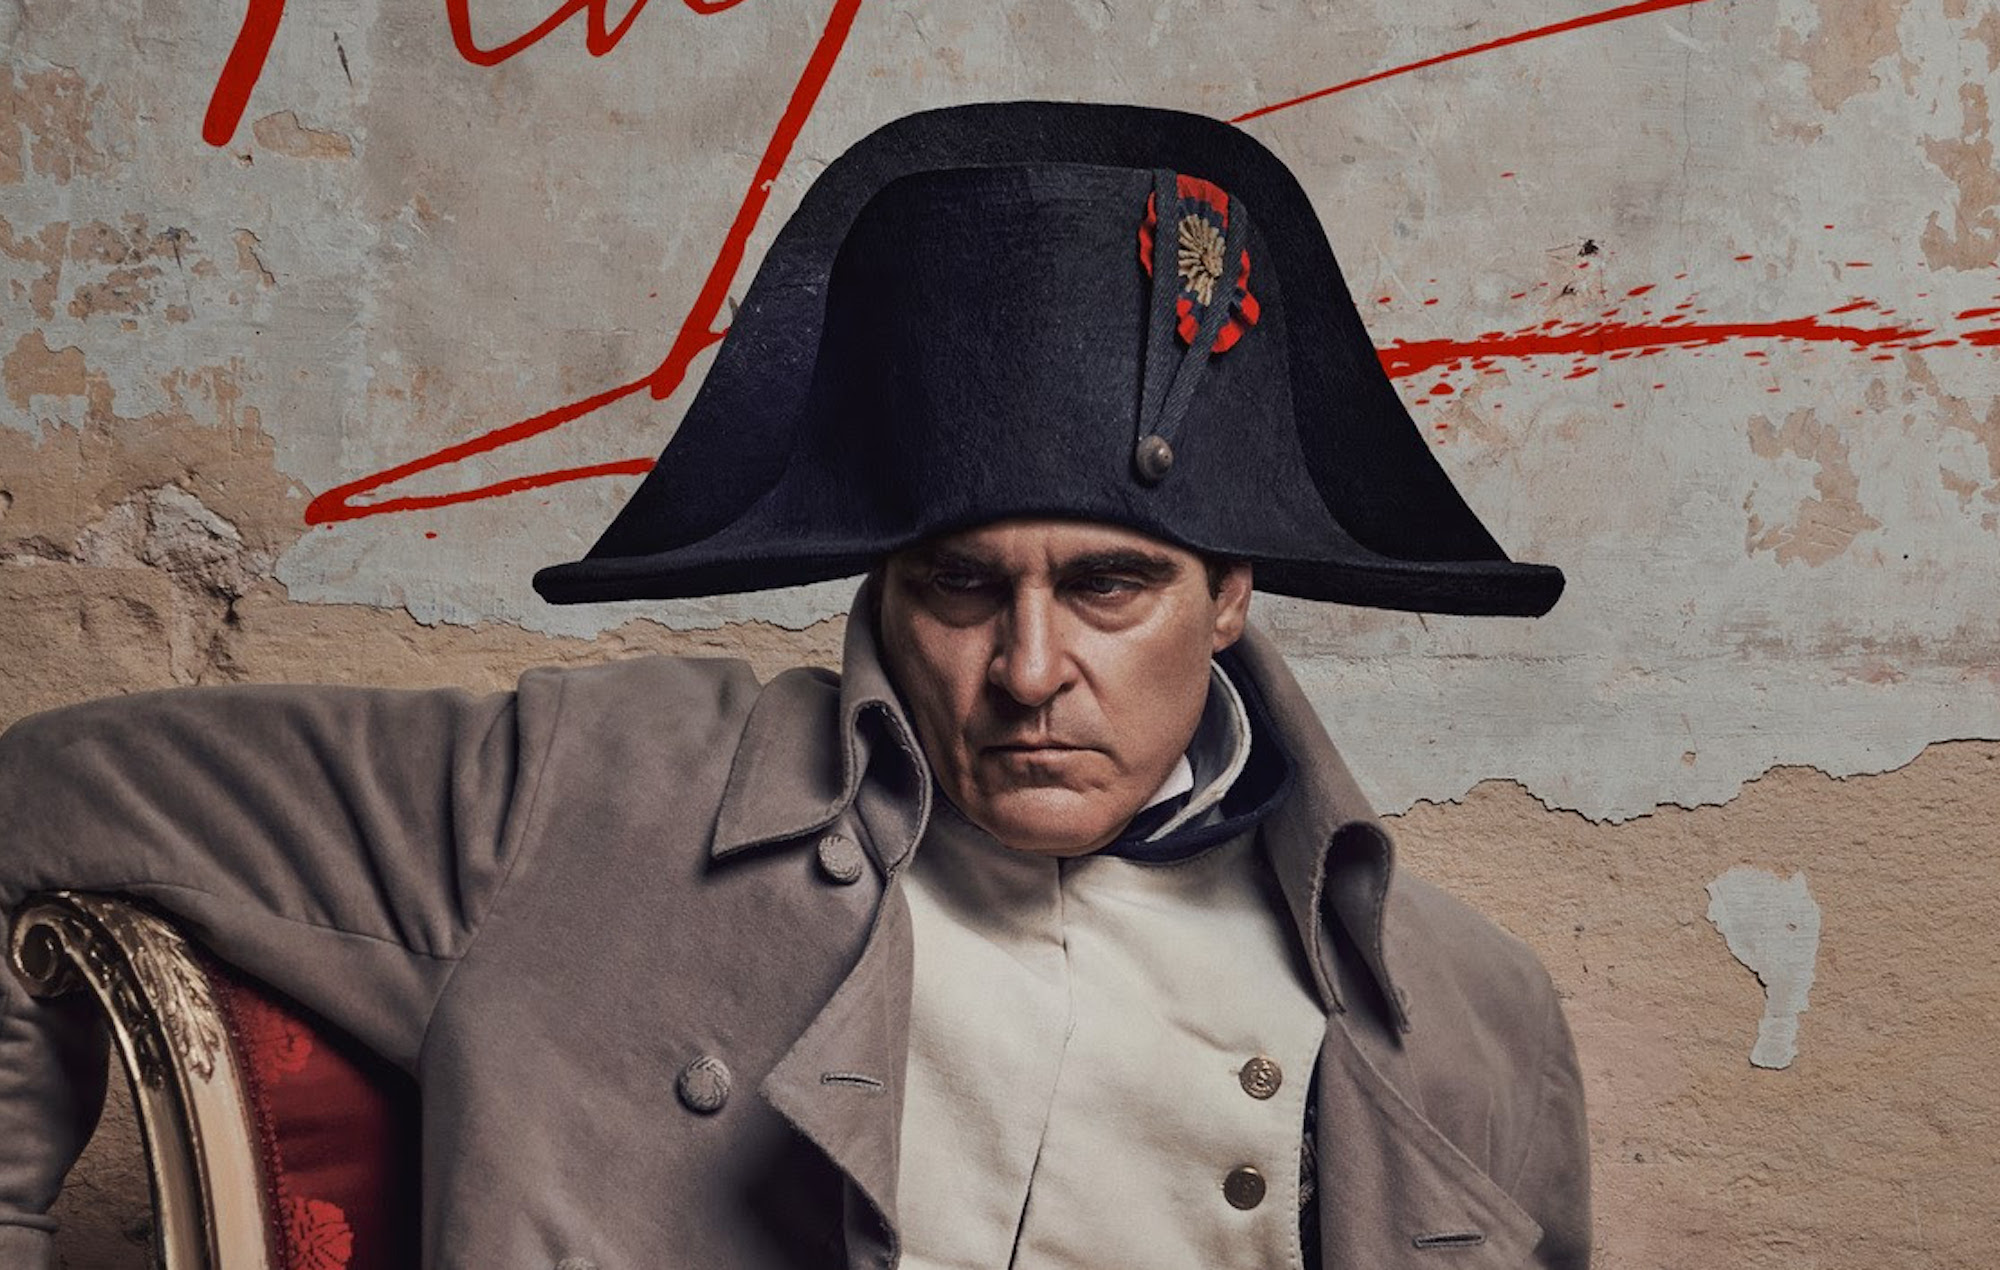 Joaquin Phoenix “didn’t know what to do” before ‘Napoleon’ shoot